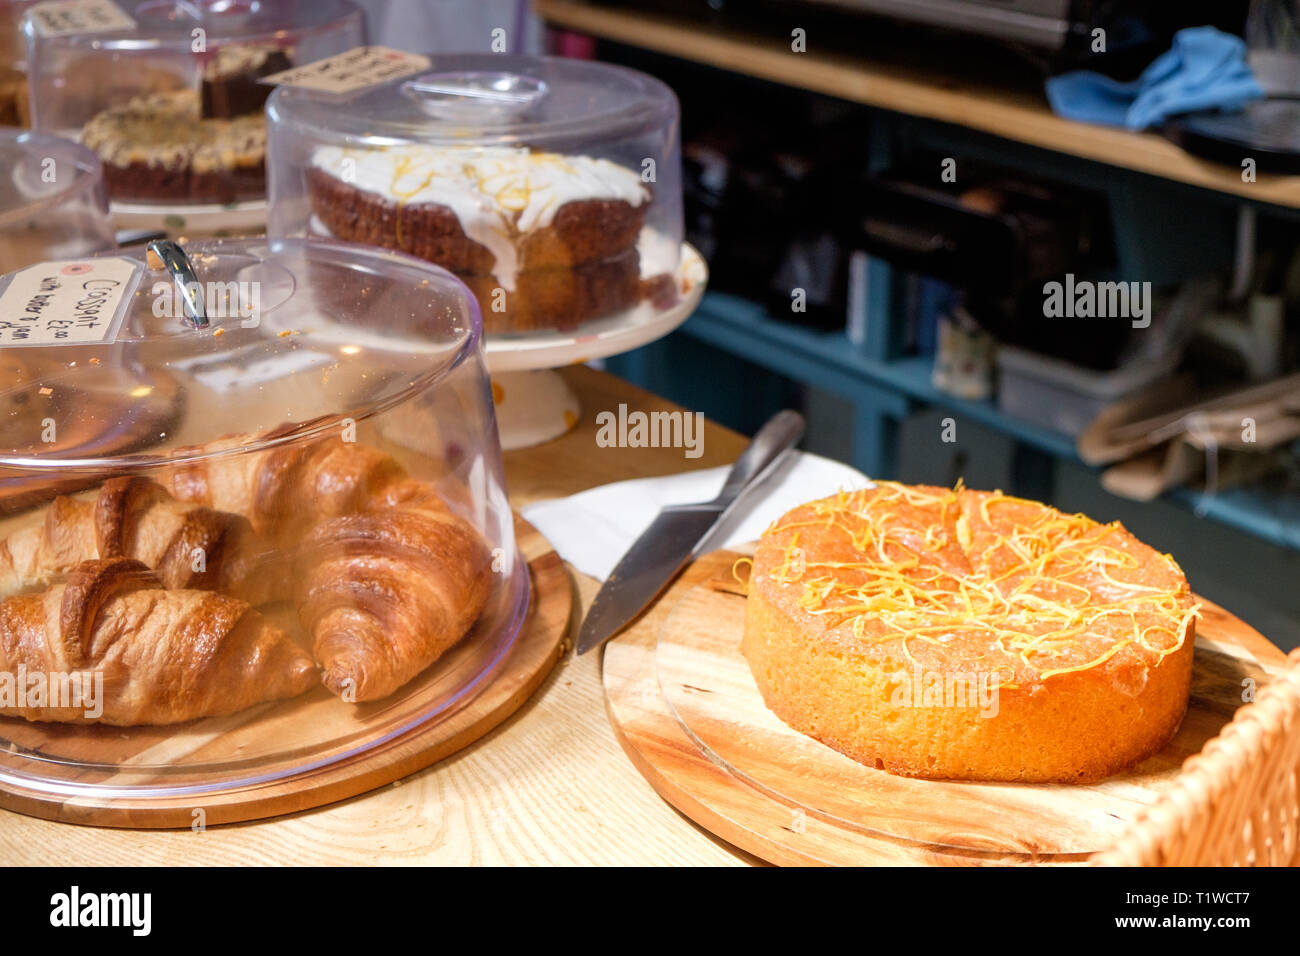 Cakes and pastries at Wiveton Hall Fruit Farm cafe in North Norfolk, England. Stock Photo